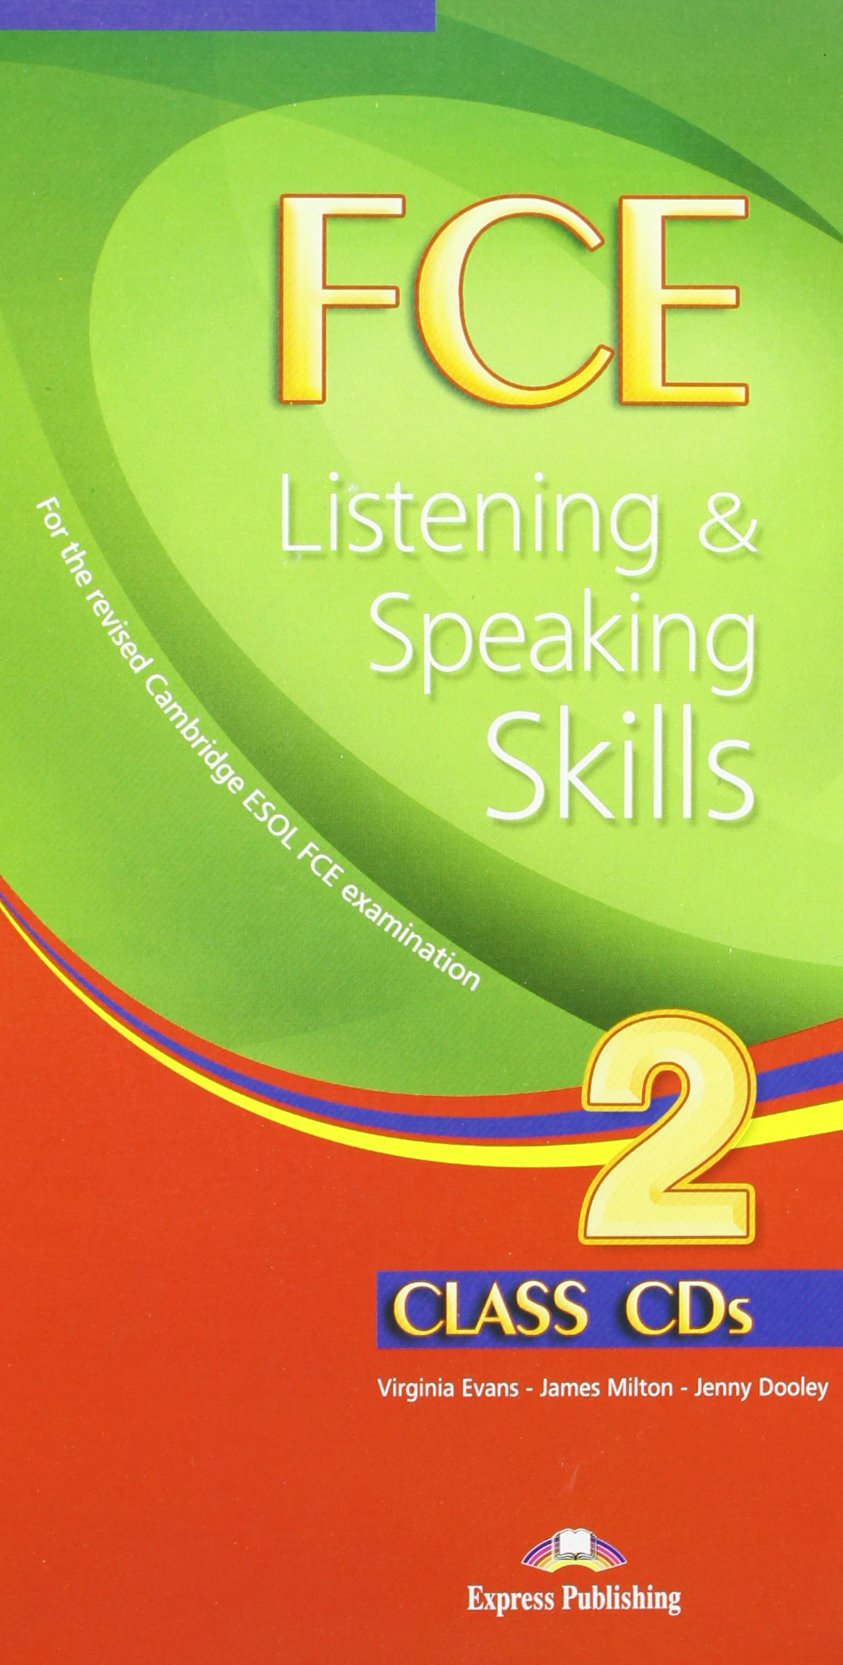 Audio] Fce Listening And Speaking Skills 2 (Test 6-10) - Sách Tiếng Anh Hà  Nội